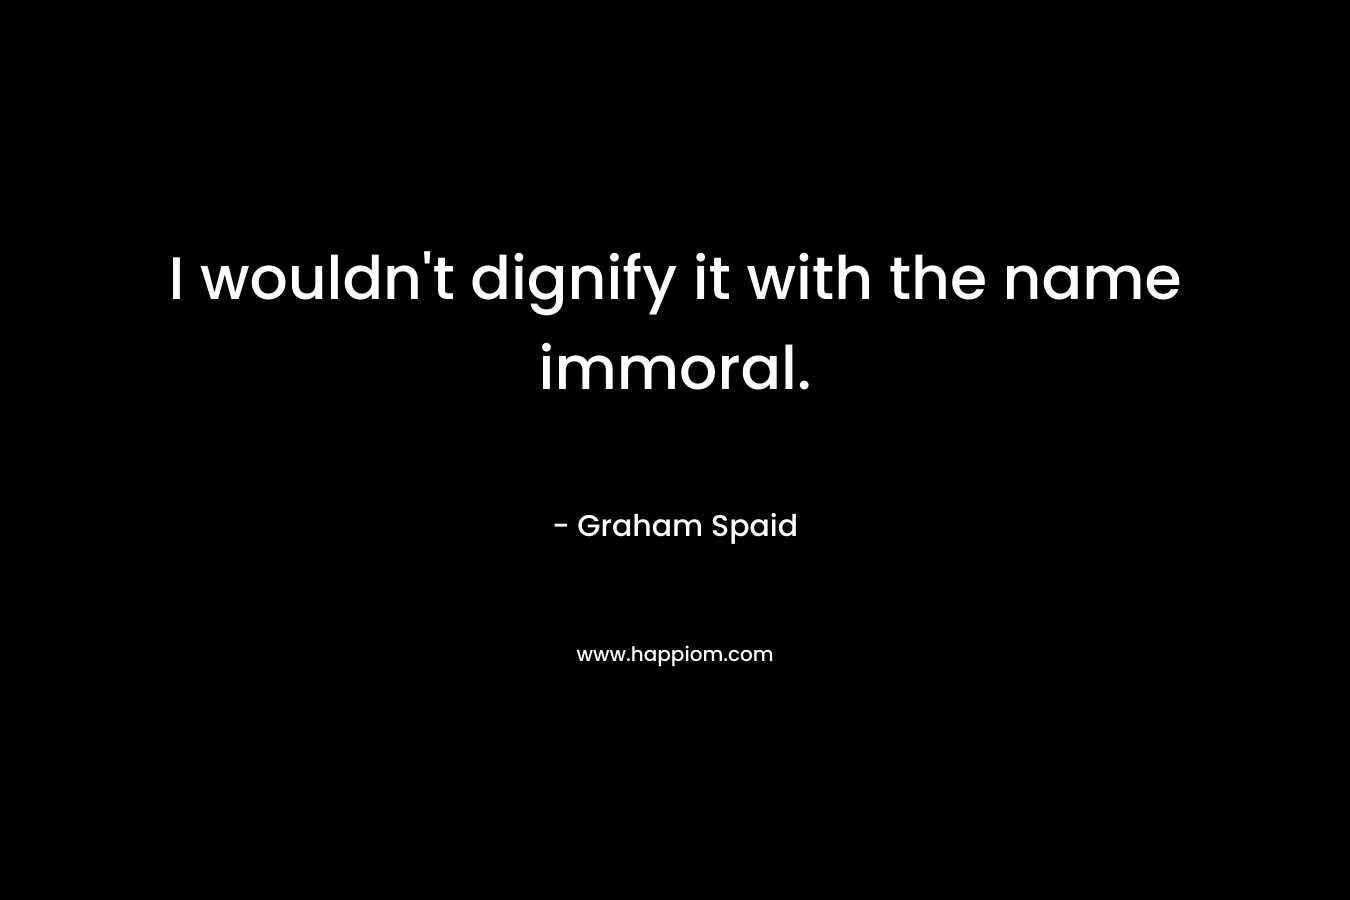 I wouldn't dignify it with the name immoral.